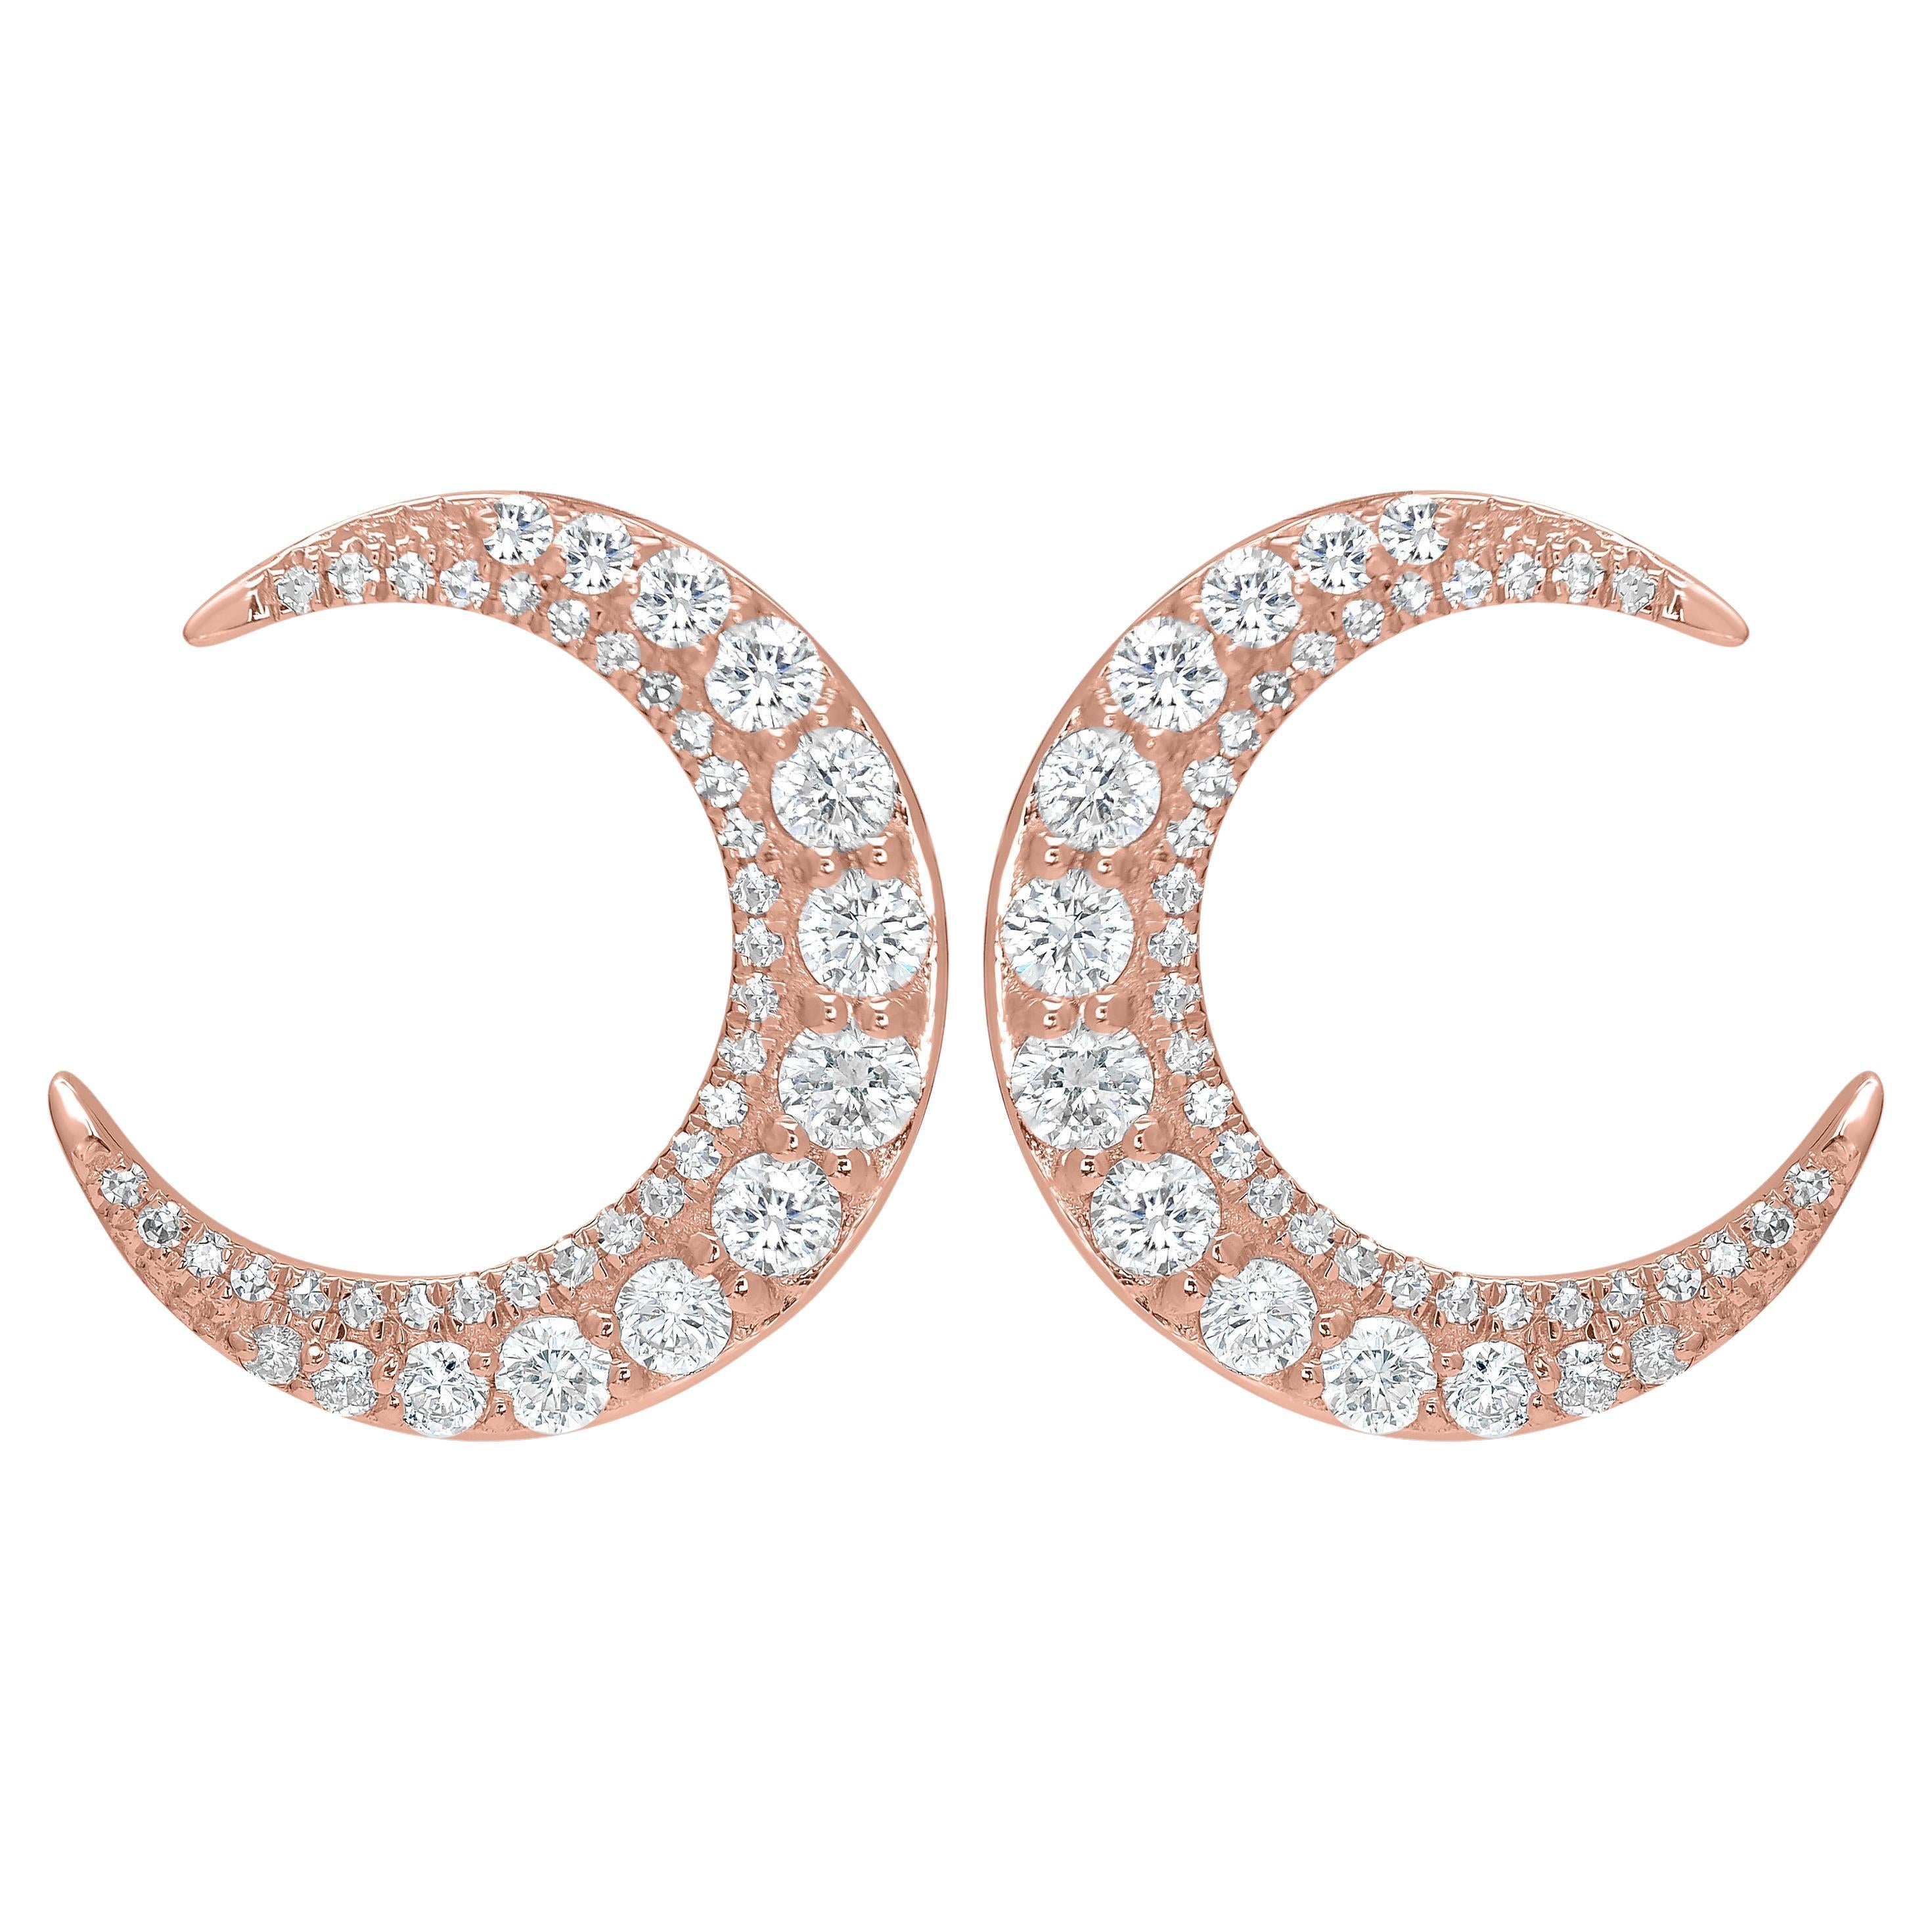 Luxle 0.91 Carat T.W. Round Diamond Crescent Moon Stud Earrings in 18k Rose Gold For Sale